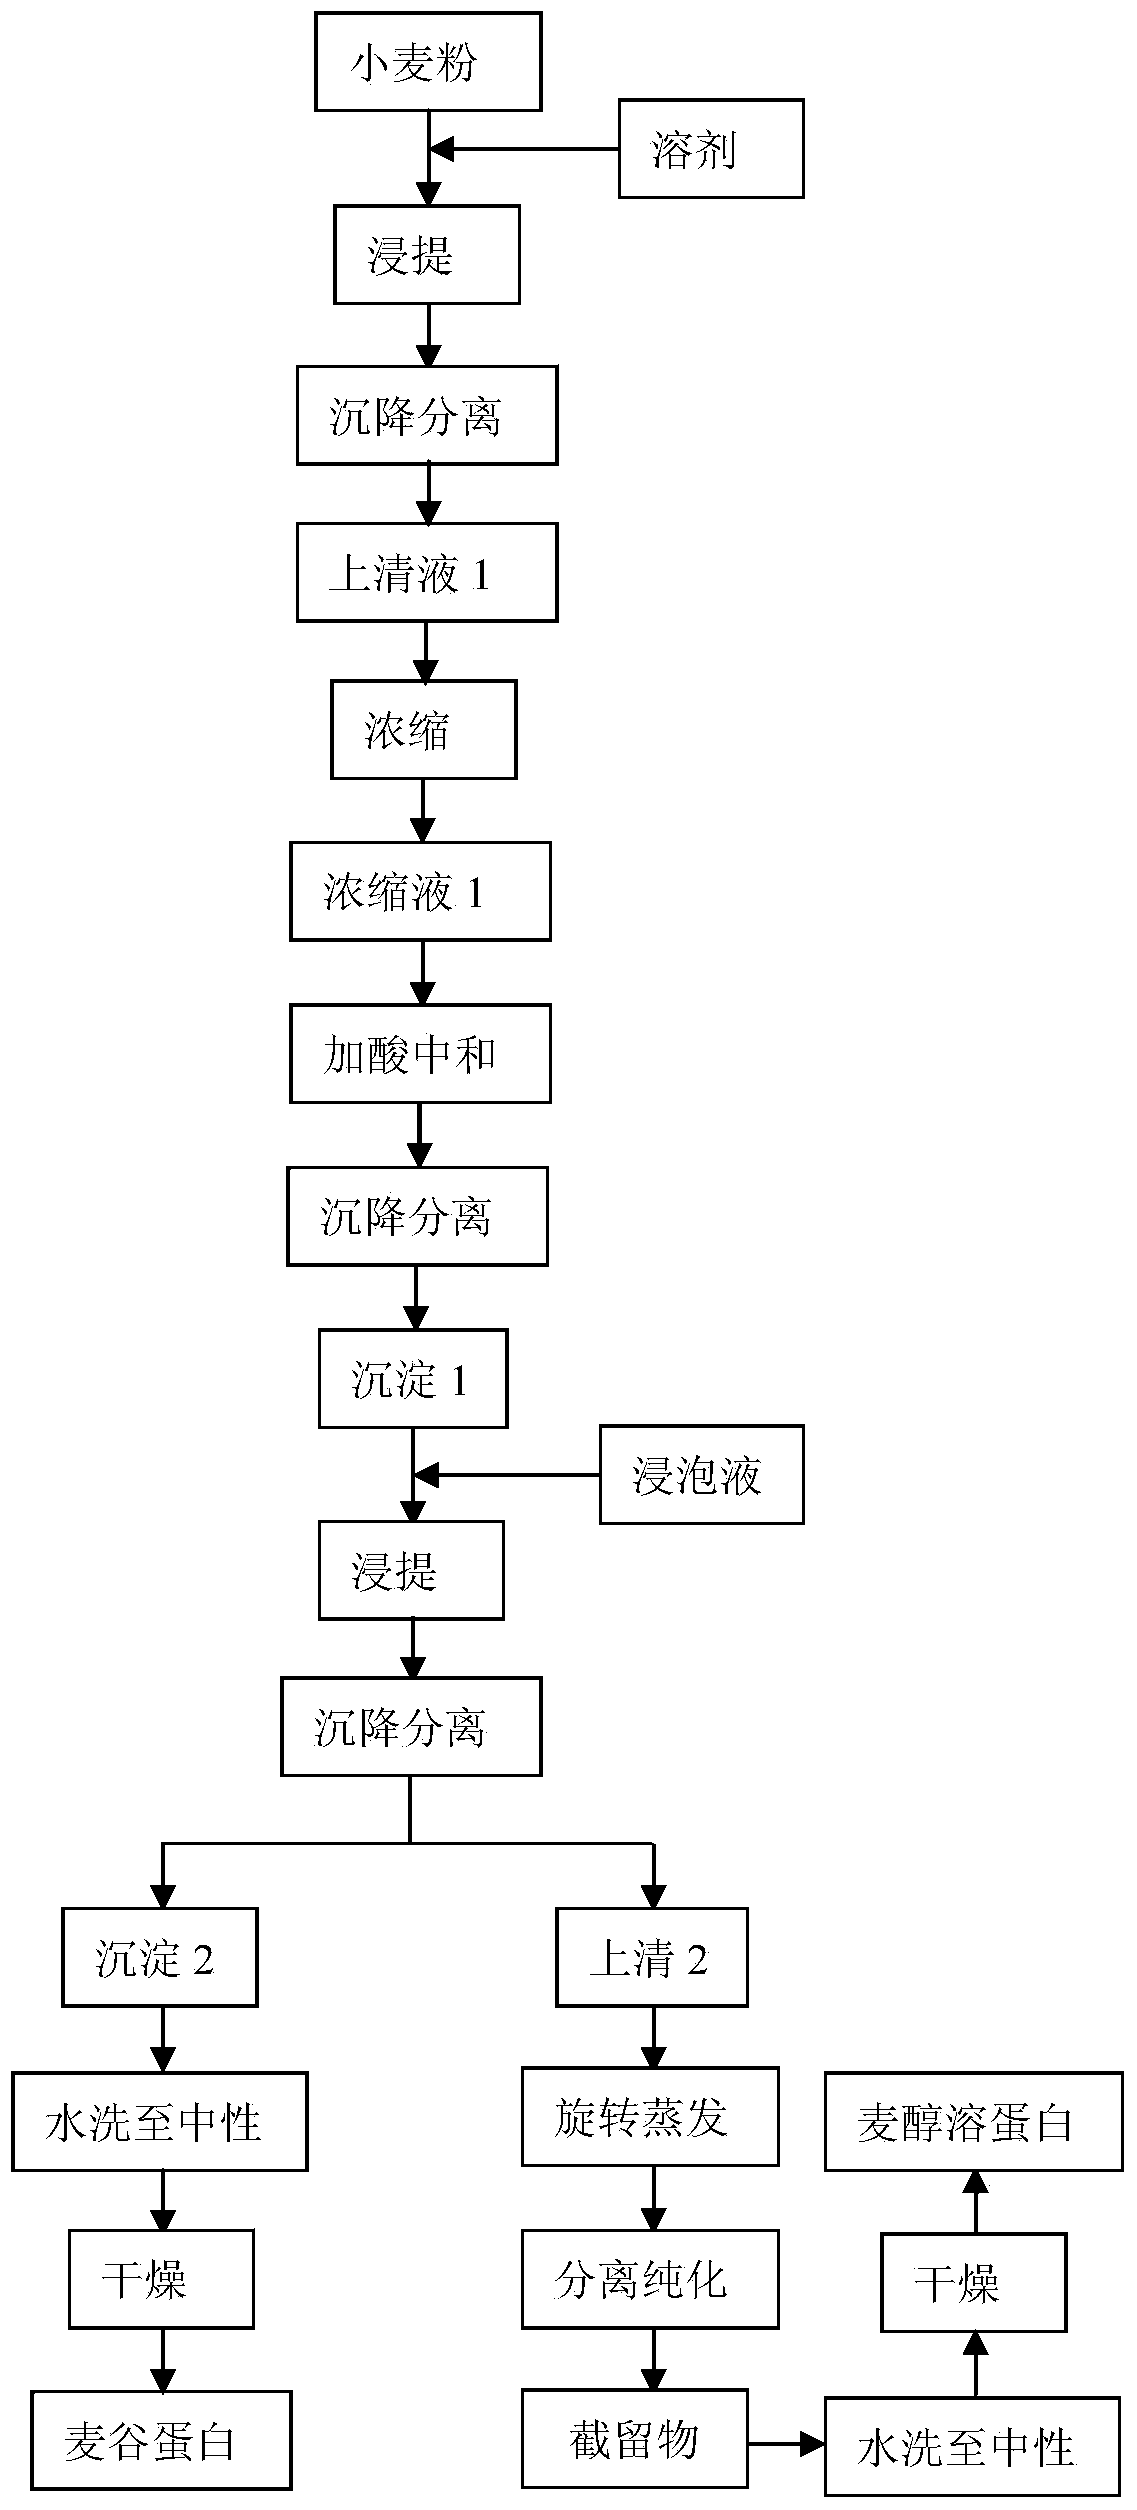 Wheat alcohol-soluble protein and glutelin as well as preparation method and application thereof